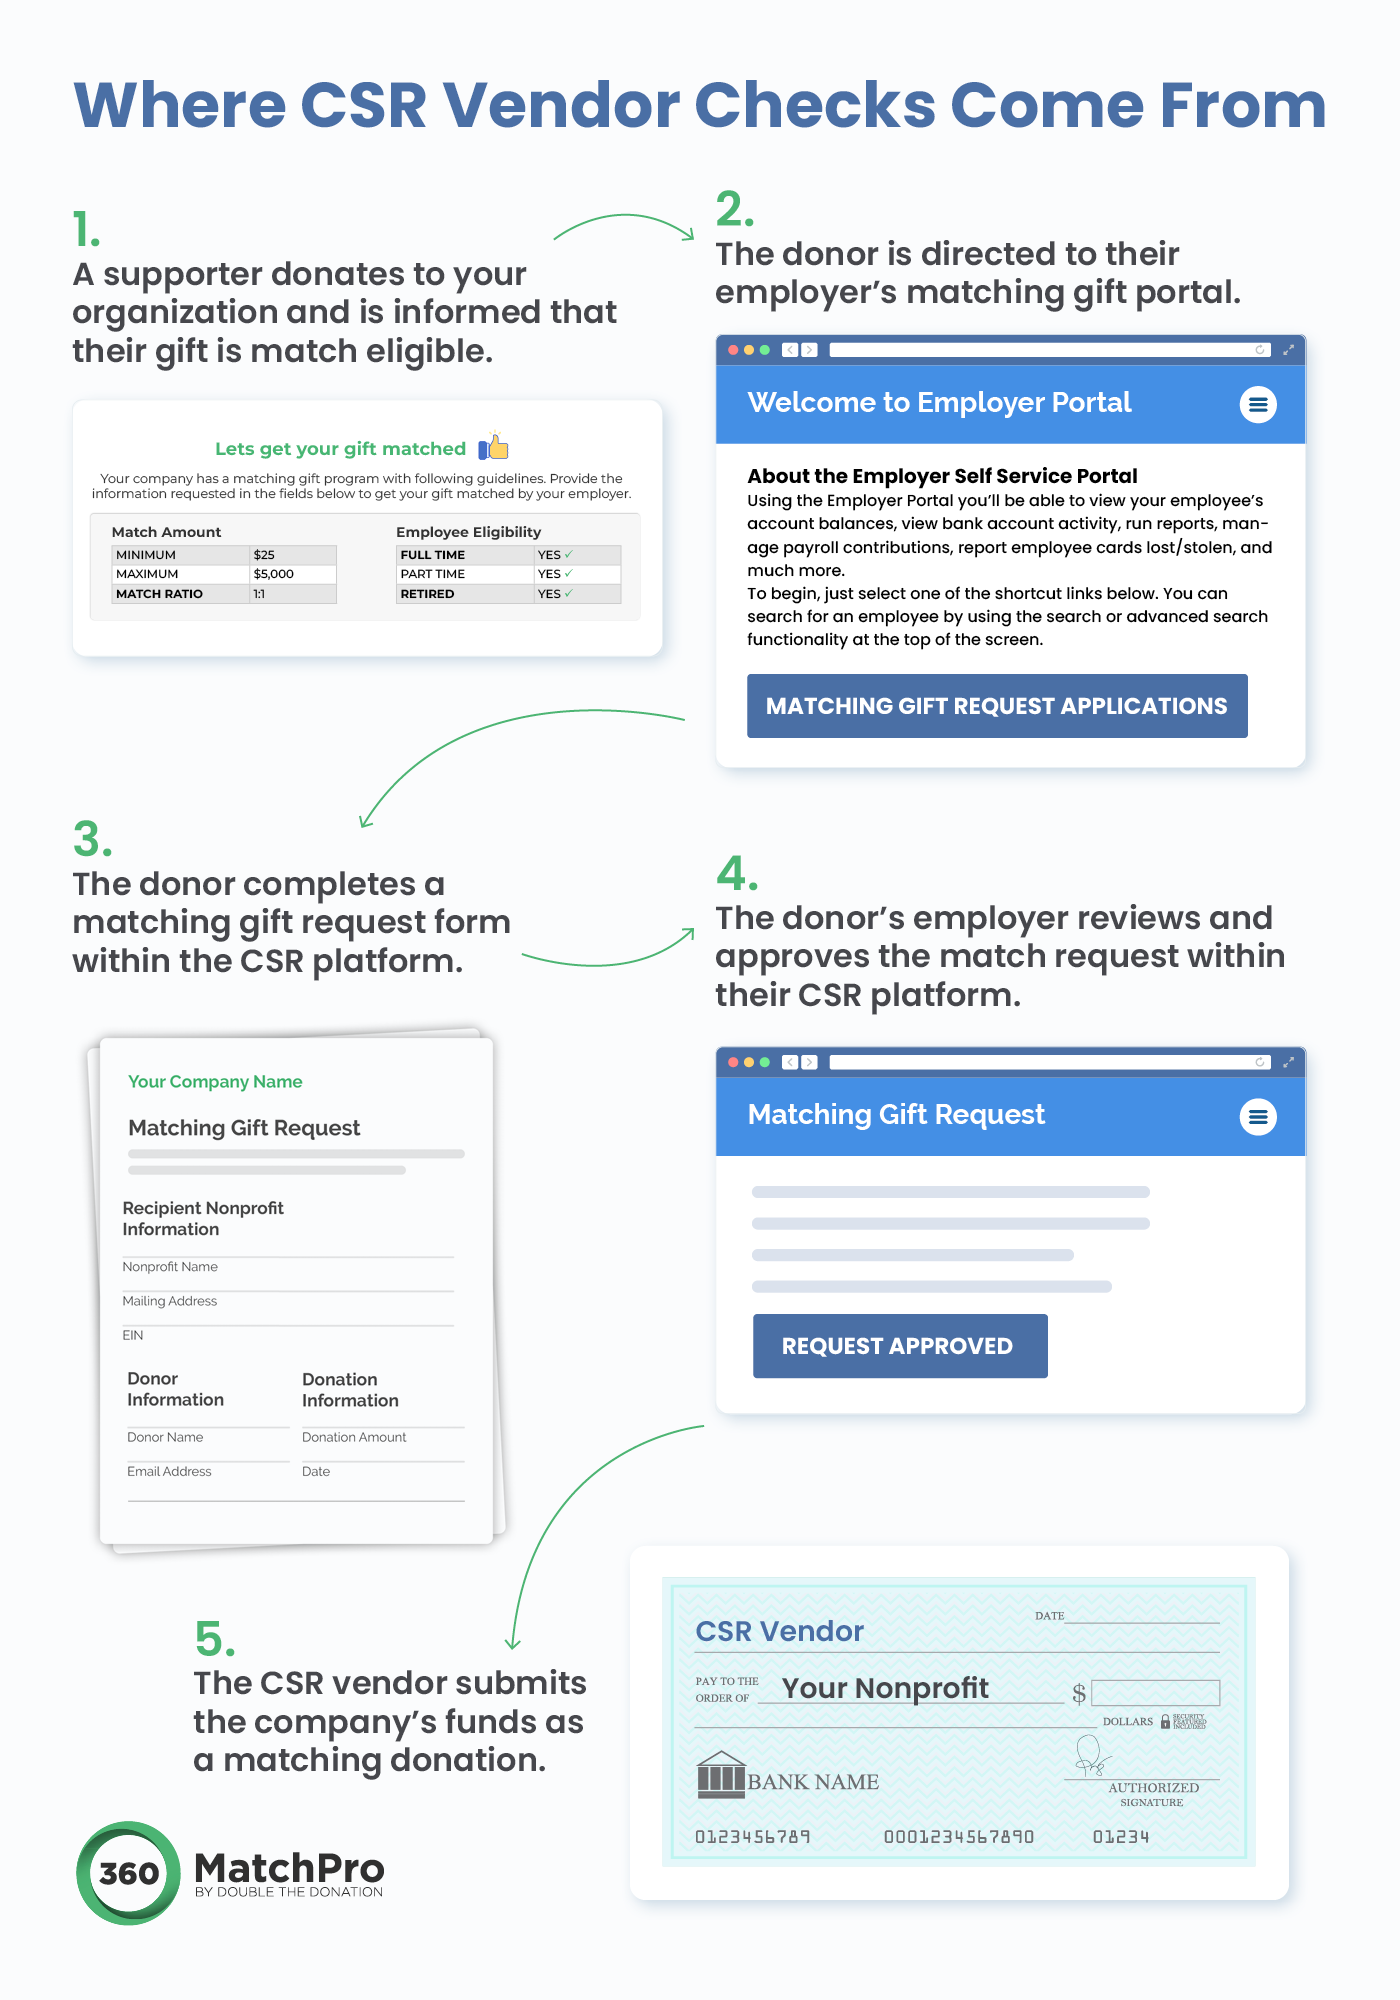 The CSR vendor check process is shown, written out below.